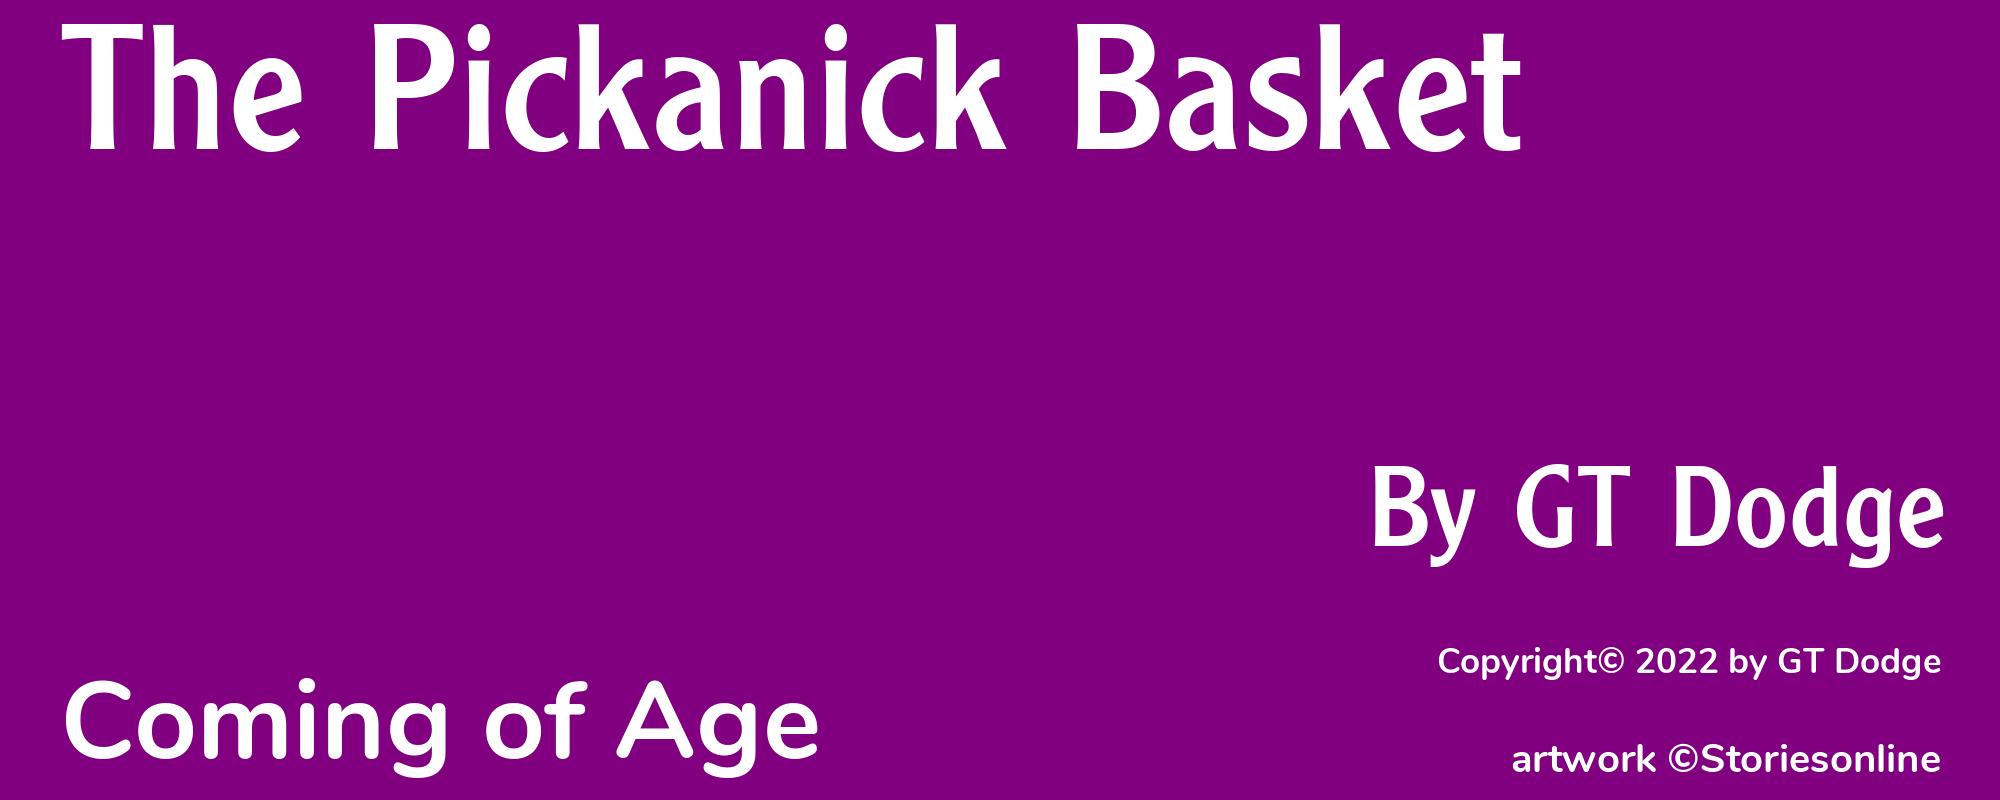 The Pickanick Basket - Cover